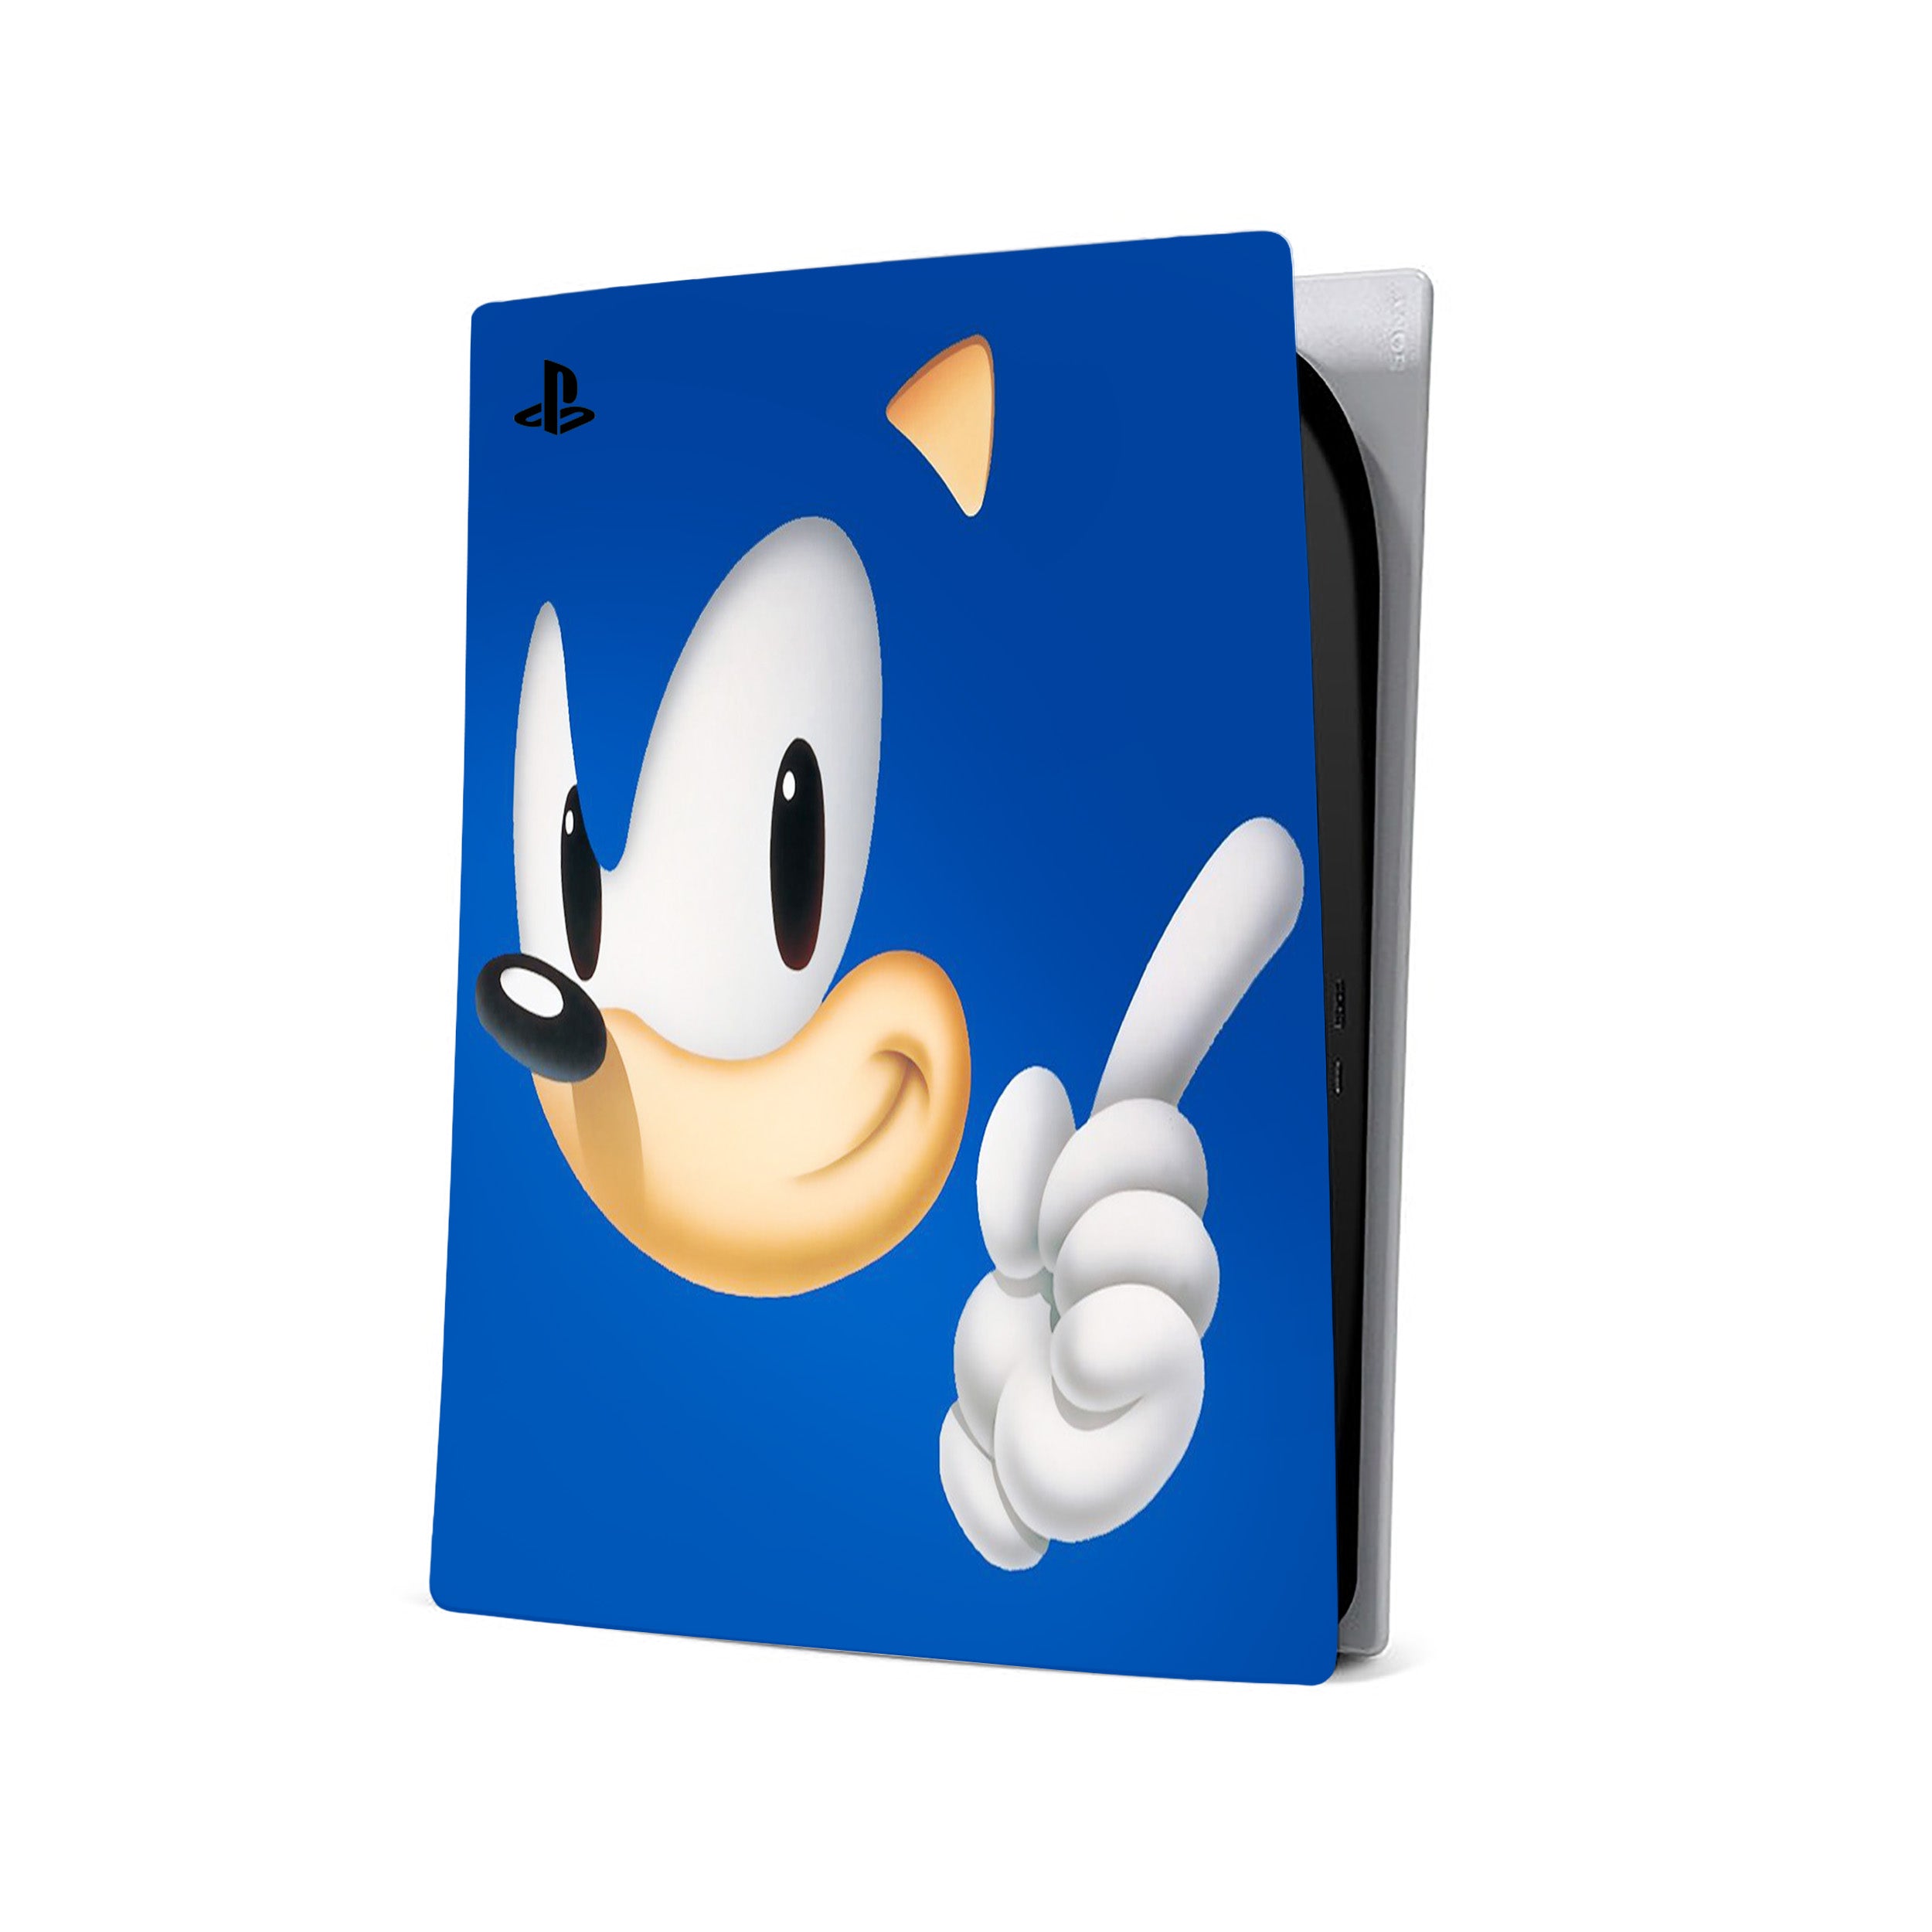 A video game skin featuring a Sonic The Hedgehog design for the PS5.